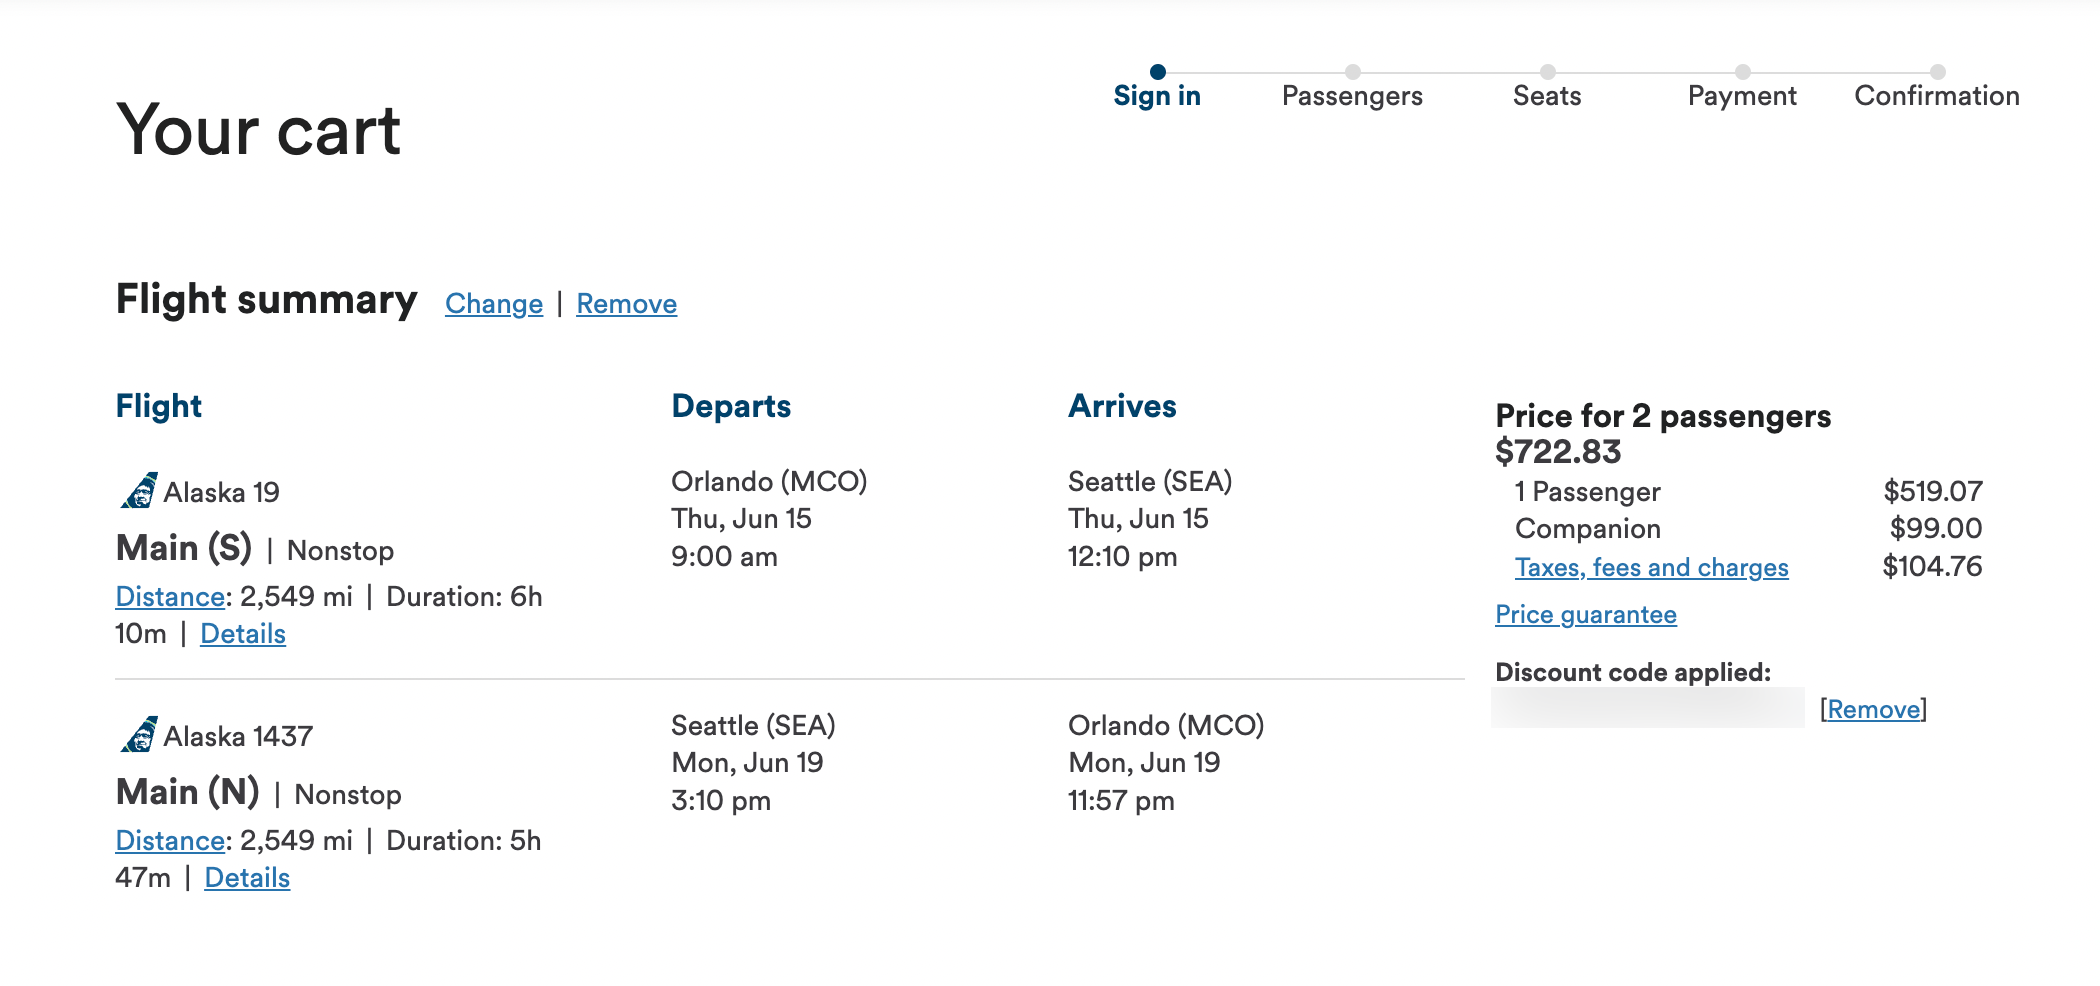 Flight price from Orlando to Seattle on Alaska Airlines using the companion fare